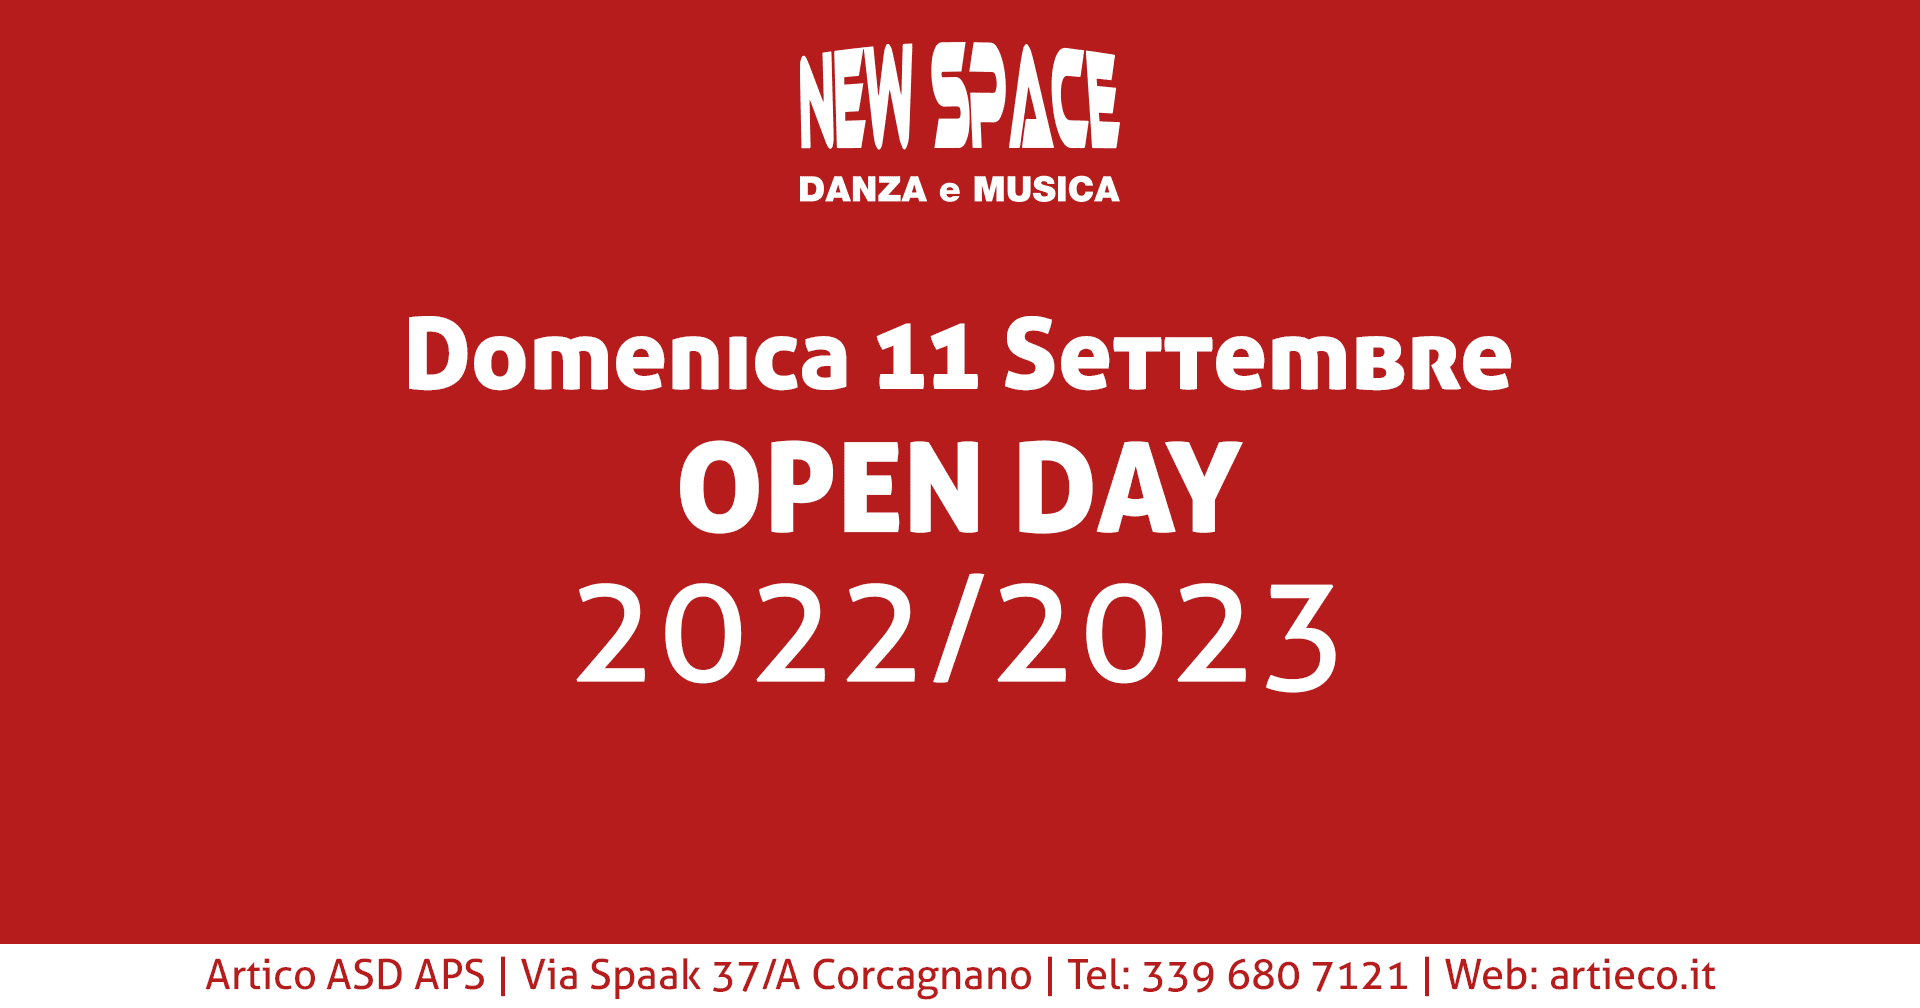 Open Day 2022